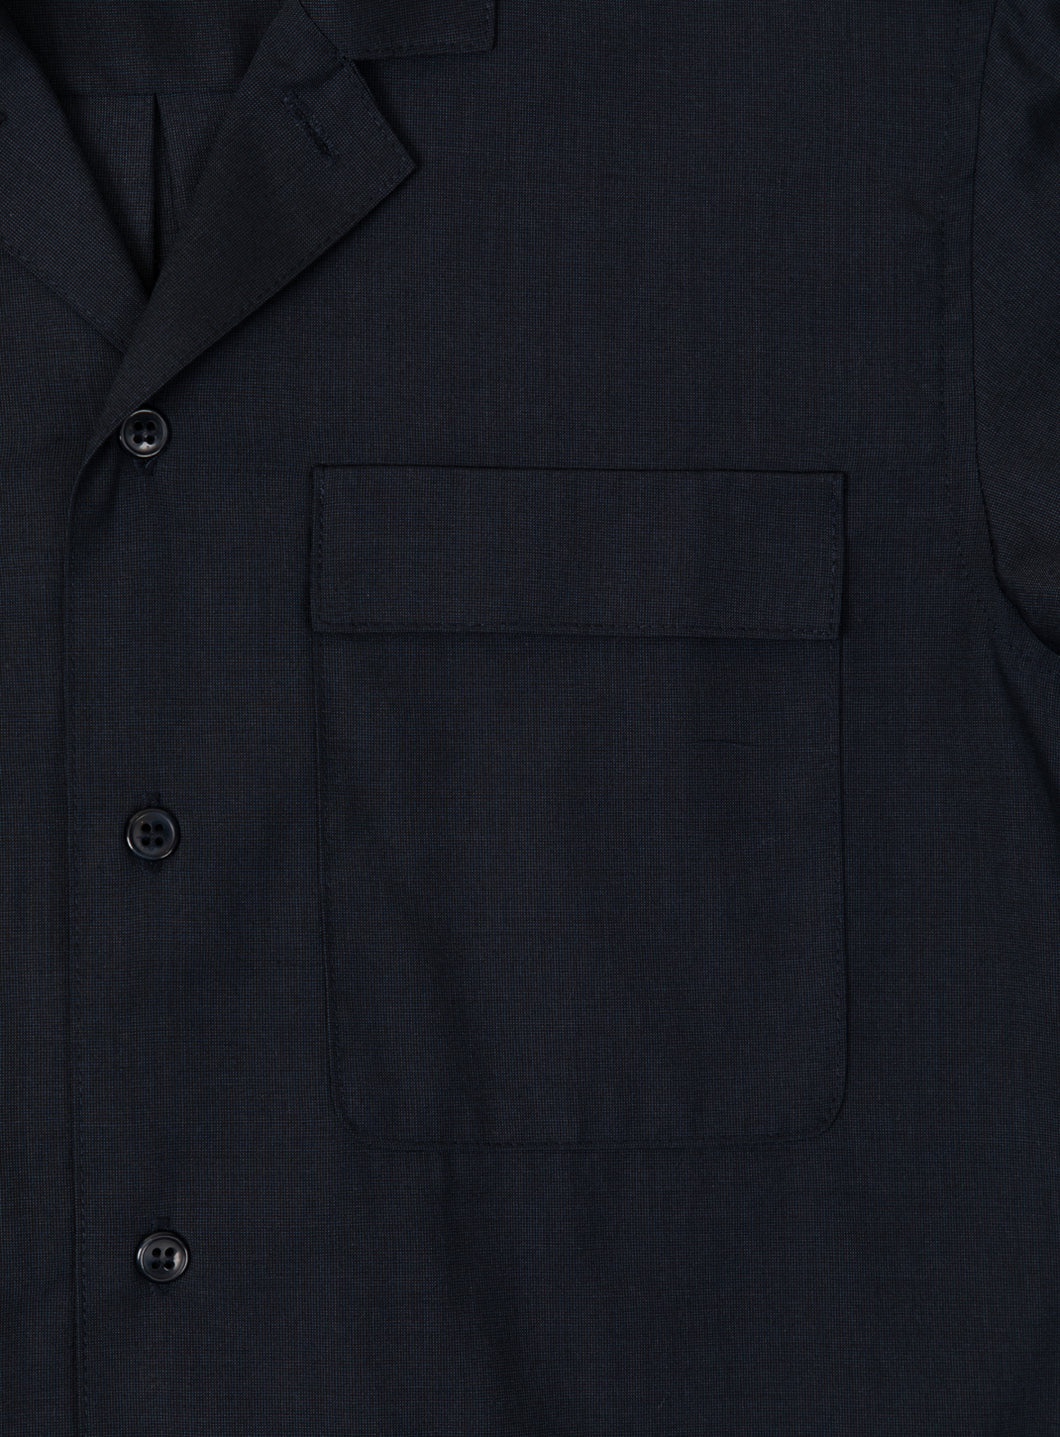 Overshirt with Tailored Collar in Navy Blue End-on-End